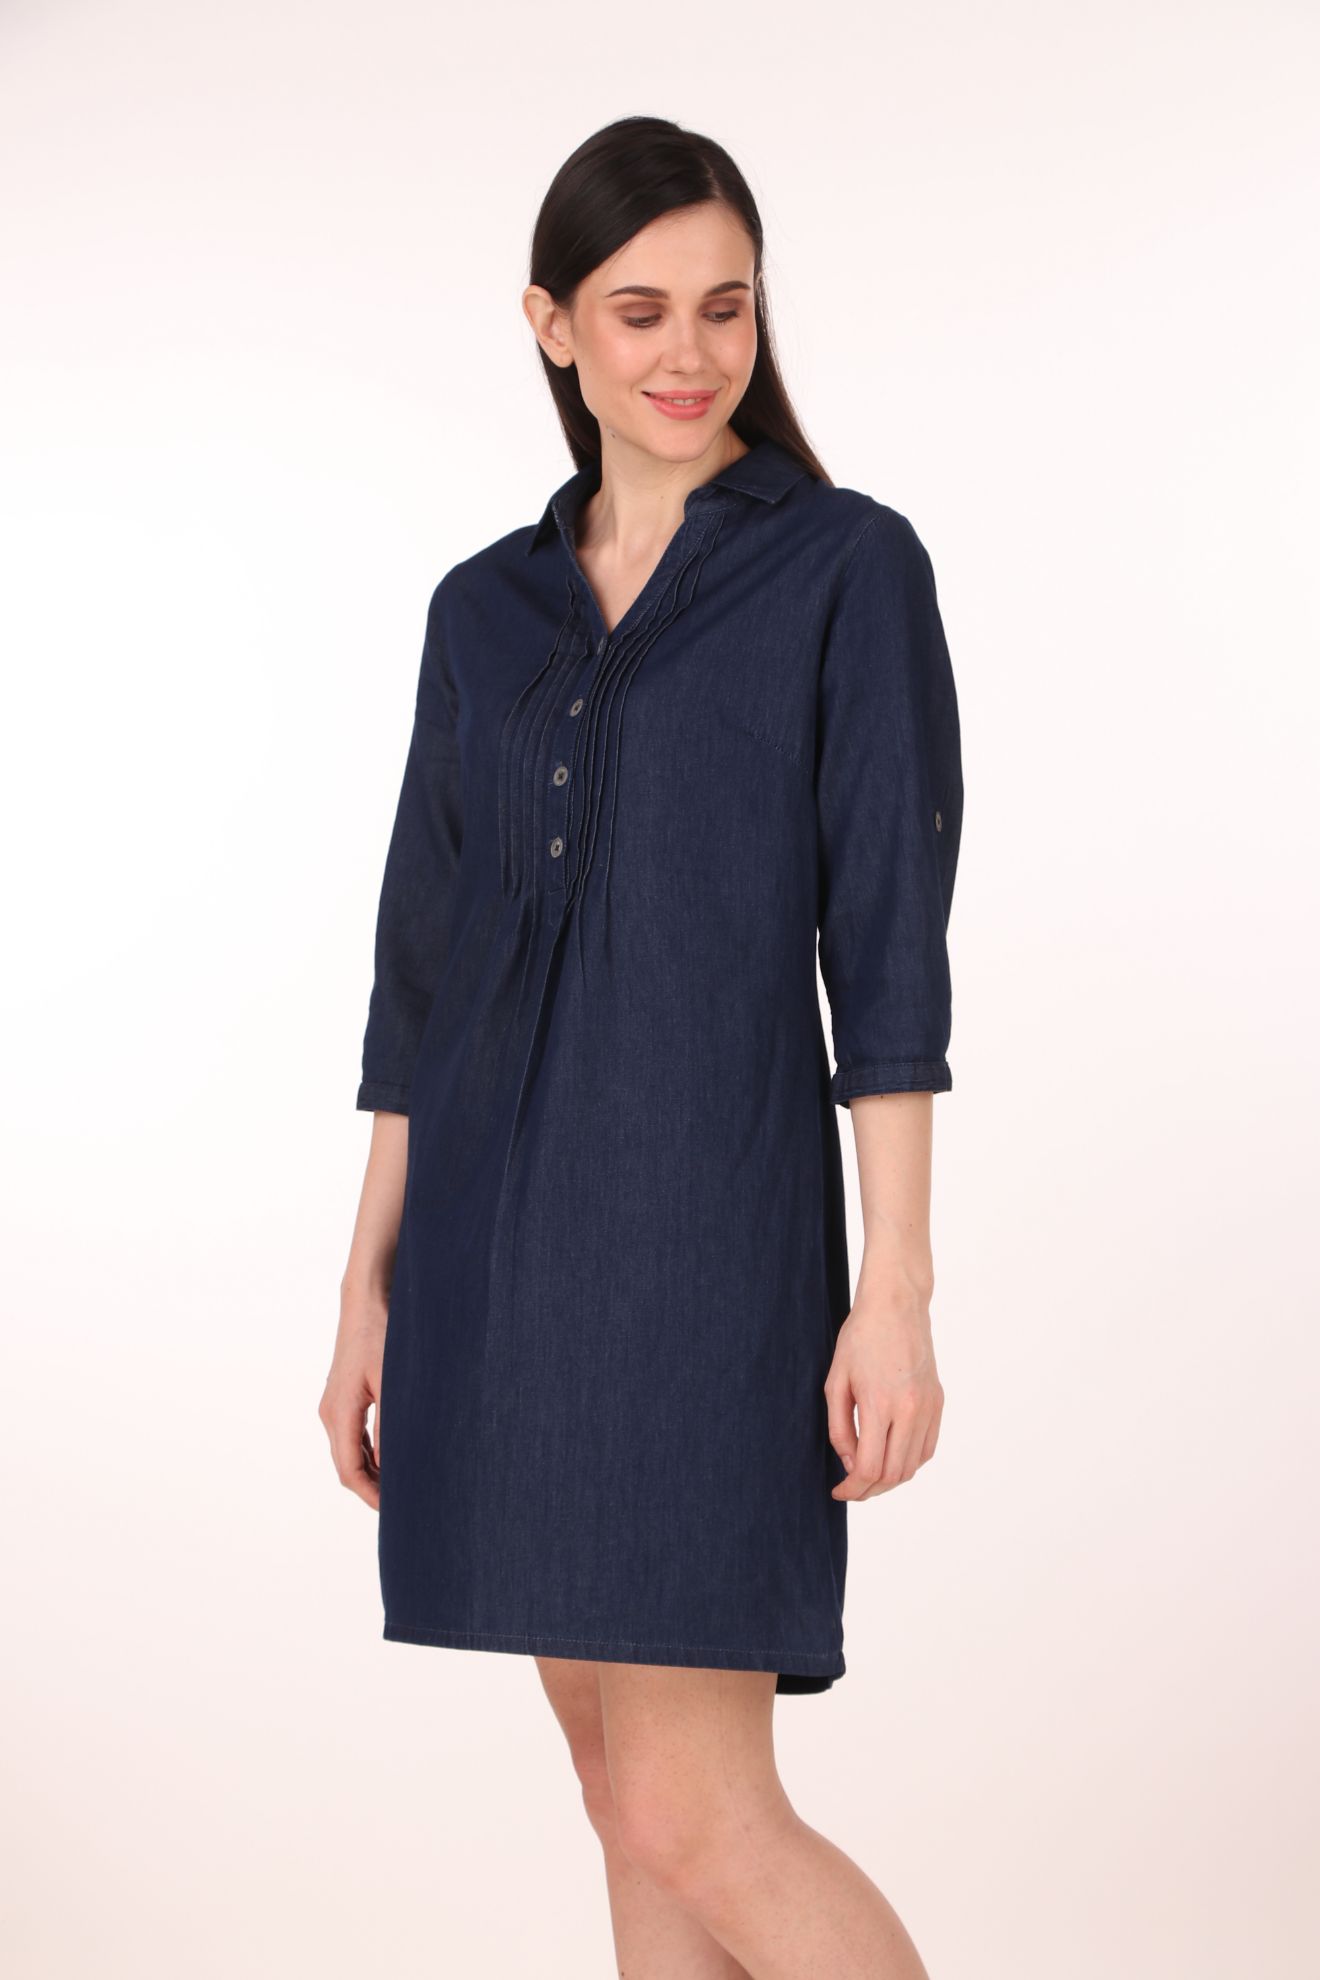 Baby Blue Dress with Delicate Neck Embroidery & Pockets. – MAMTA FOMRA